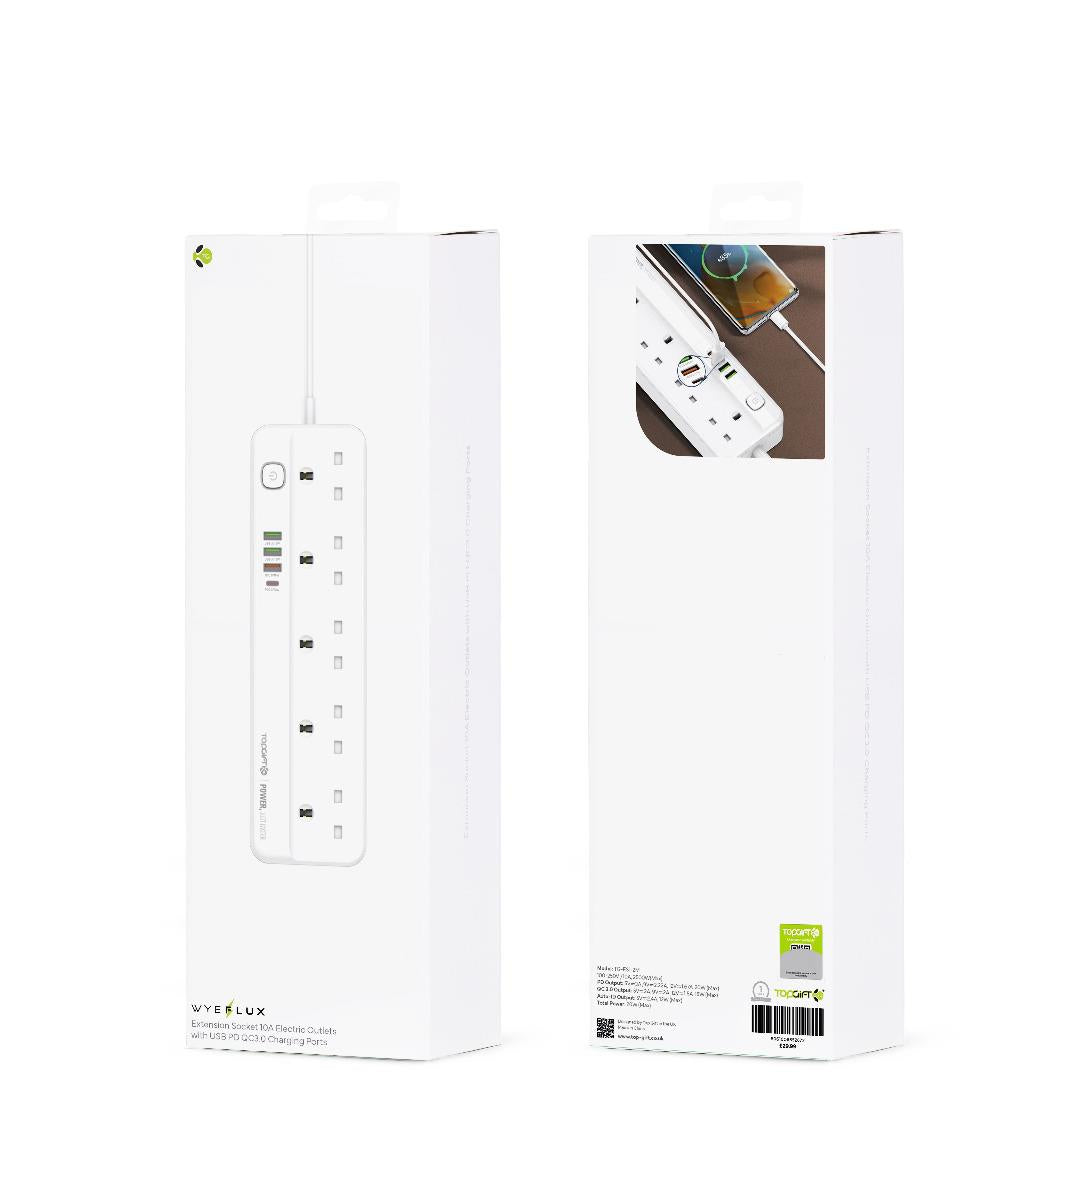 Extension Socket 10A Electric Outlets With USB PD QC3.0 Charging Ports WYEFLUX